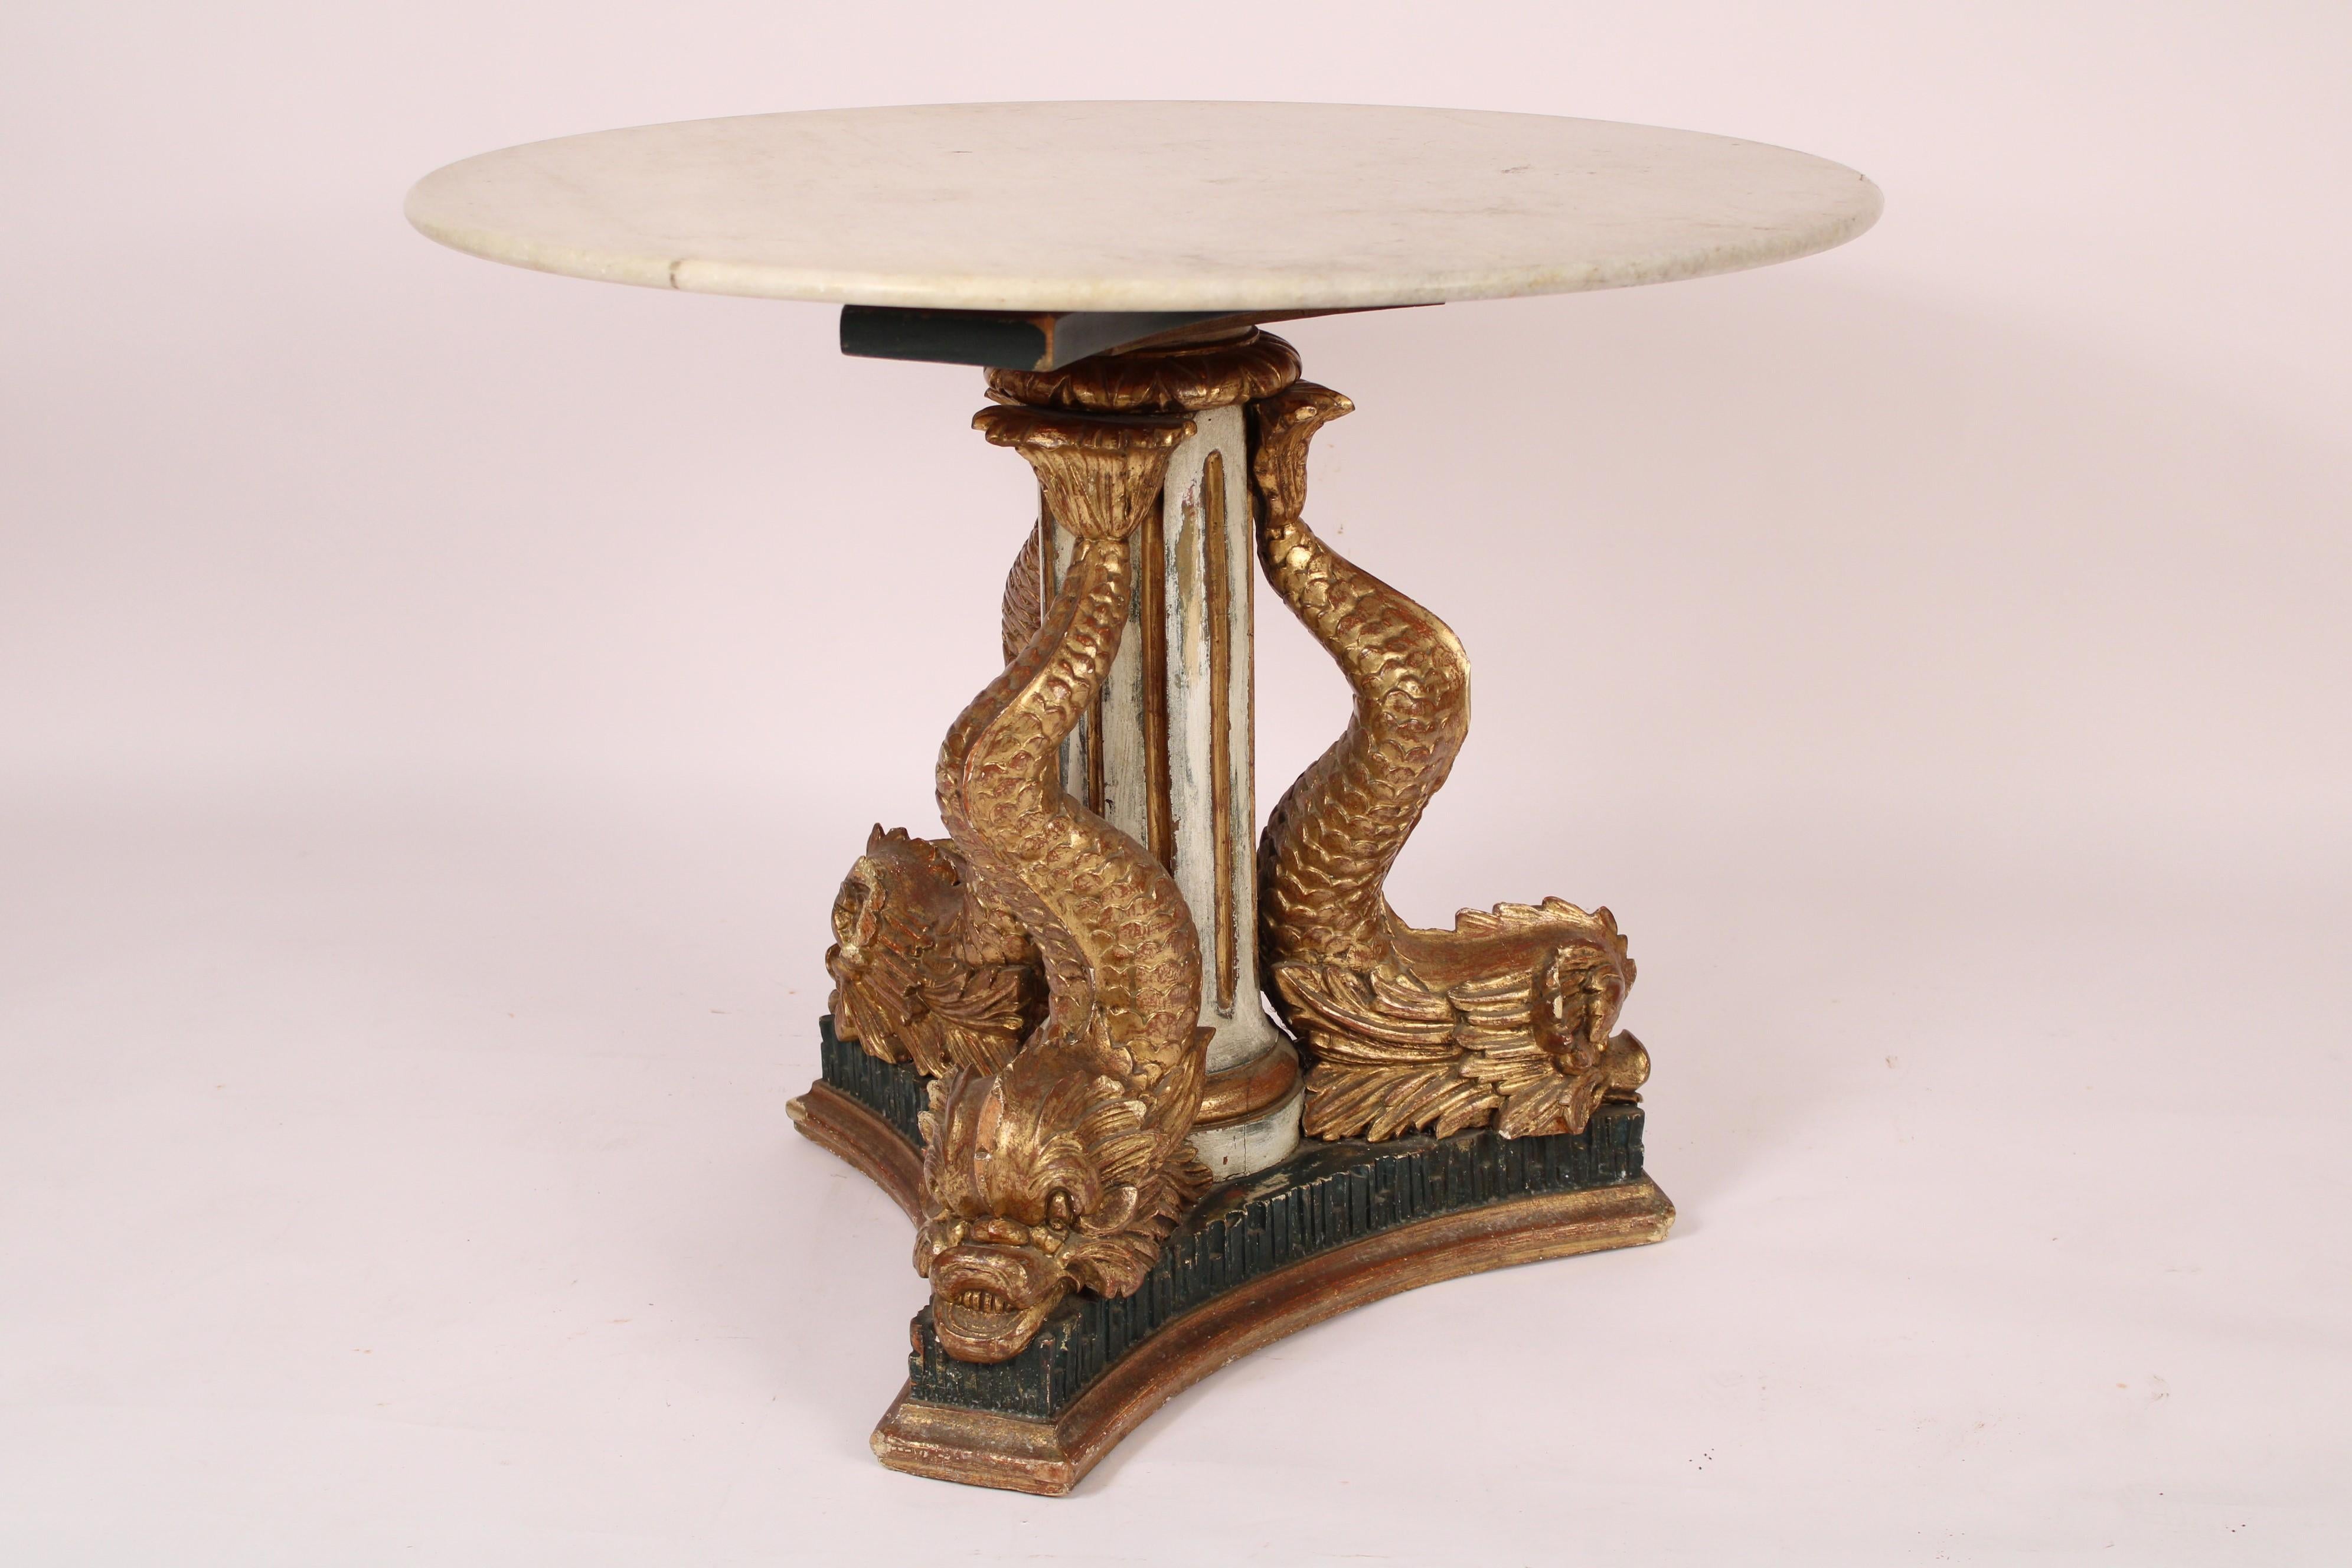 European Antique Empire Style Giltwood and Painted Marble Top Center Table